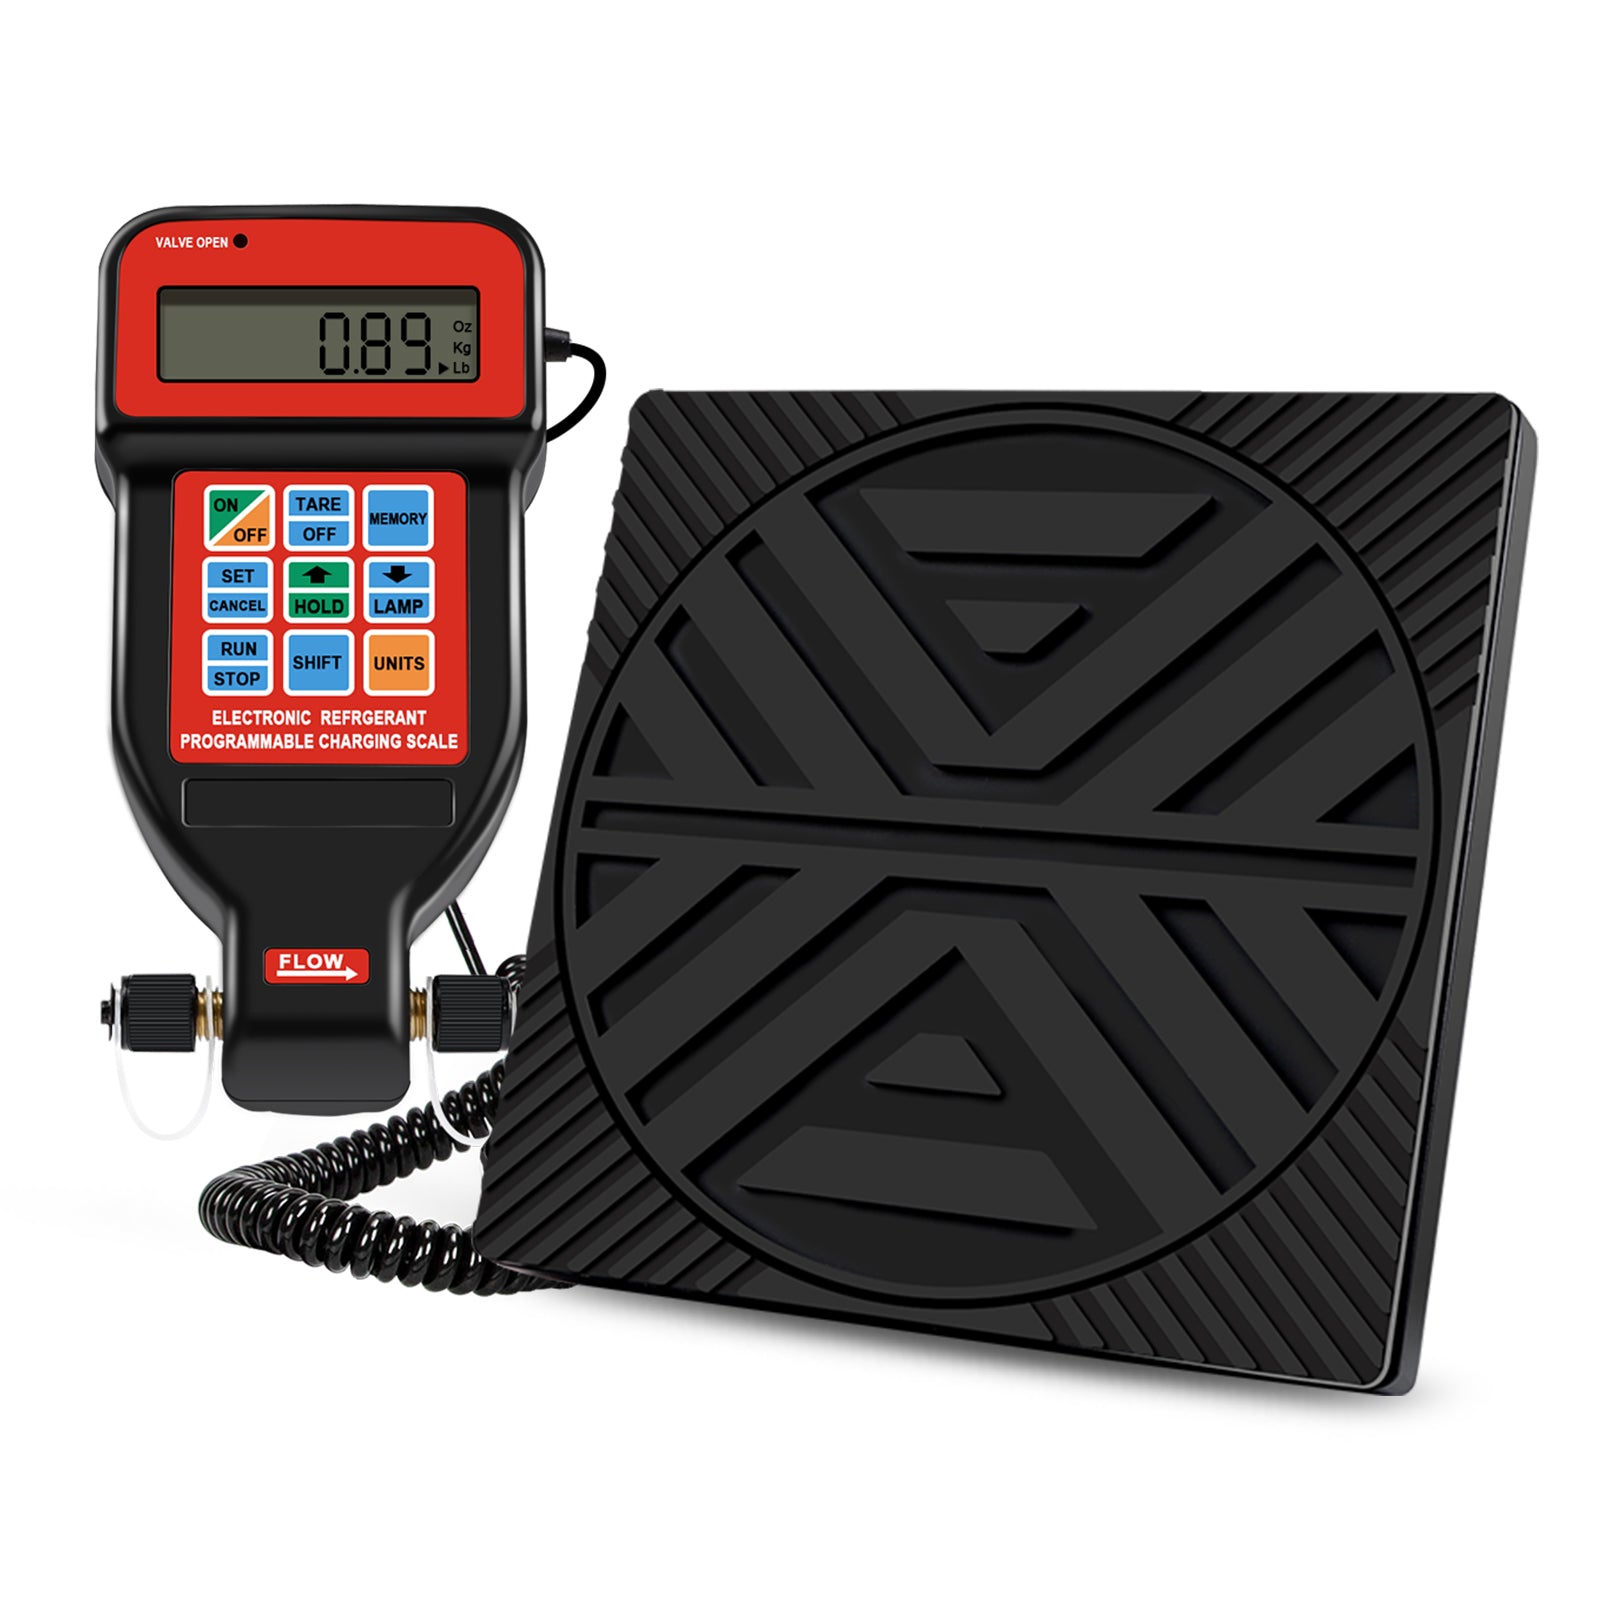 Aprvtio ACS-100SO Refrigerant Scale with Charging Valve Weight Scale 220lbs/100kgs